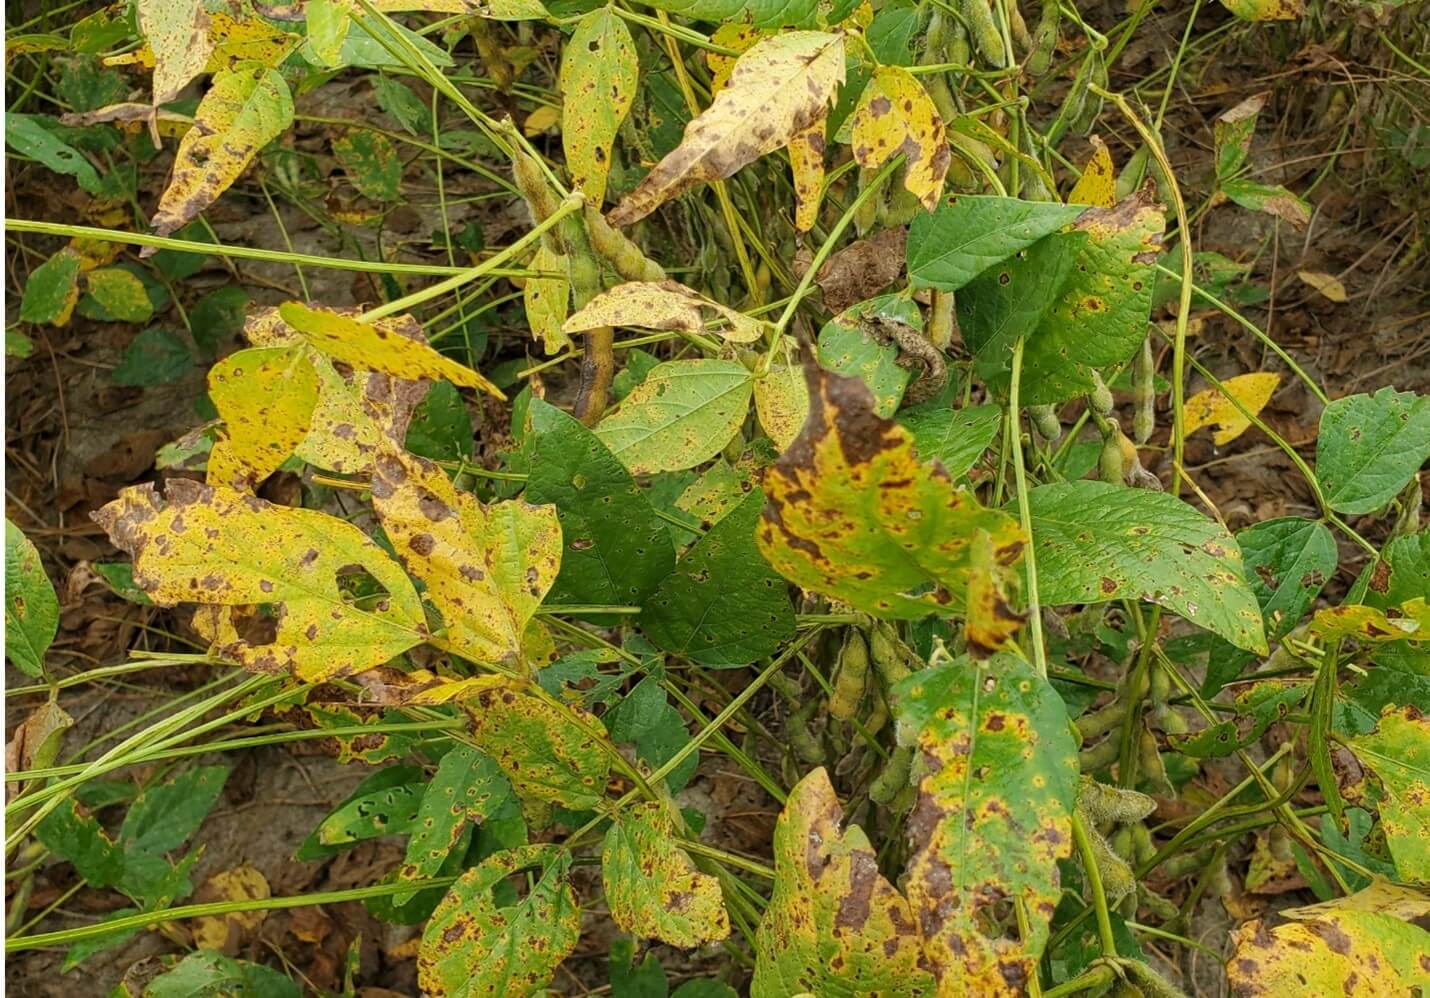 Soybean plants with severe Septoria brown spot infection. Leaves are yellowed with brown spots, some having holes. Research in Arkansas, County, 2021